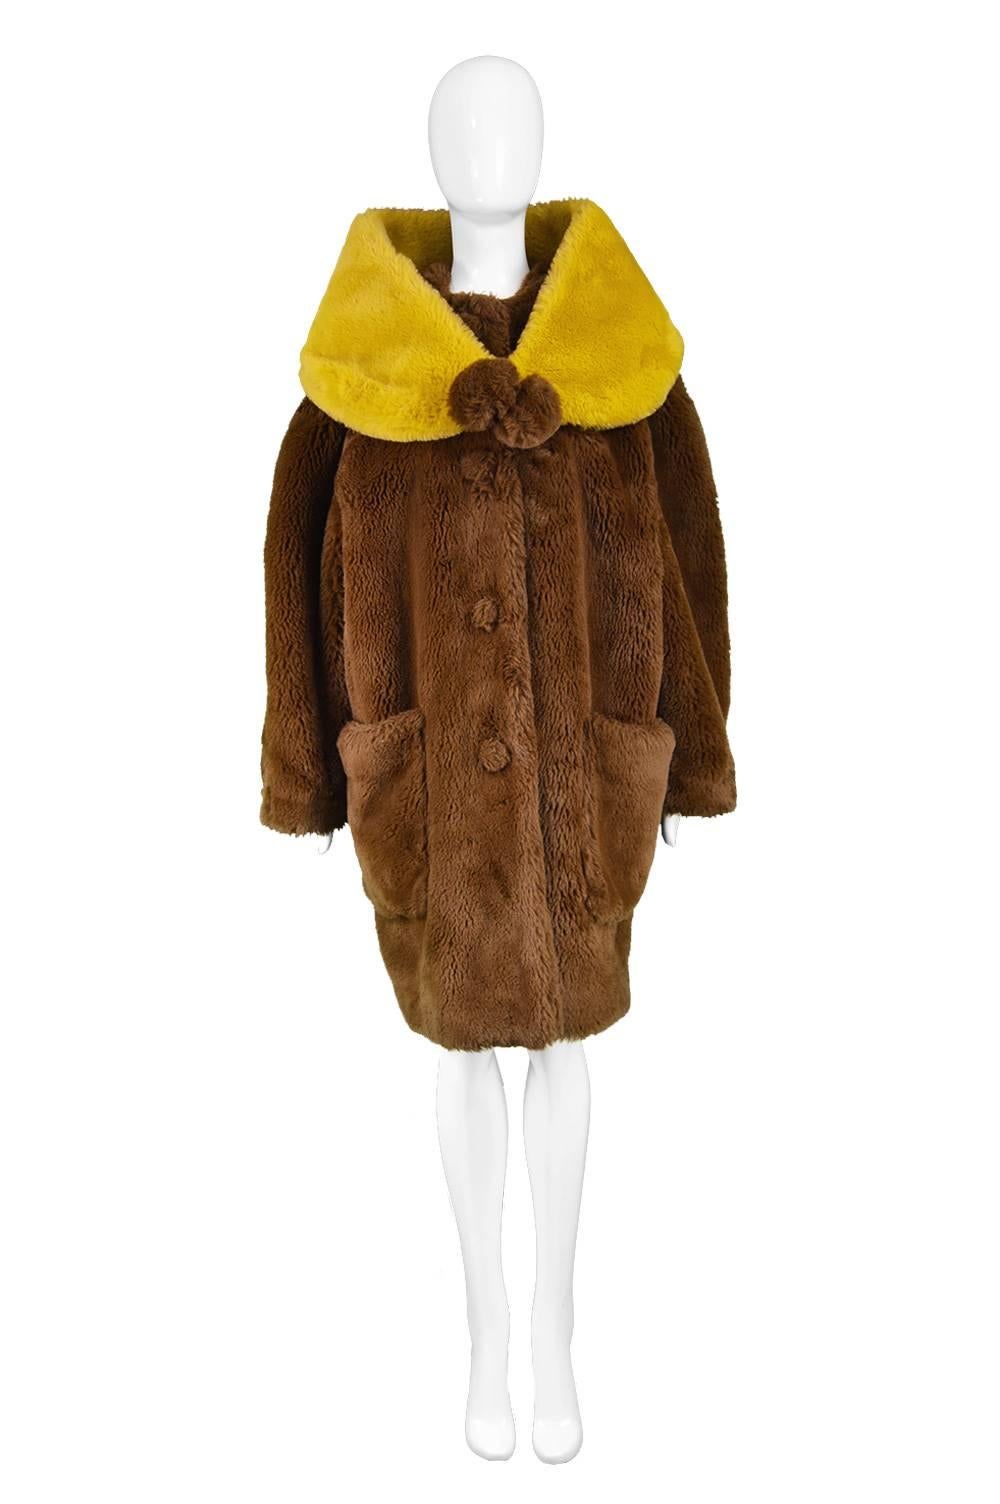 Jean Paul Gaultier Dramatic Brown Faux Fur Swing Coat with Wrap Stole, 1980s

Size: Marked 46 which is roughly a women's Large but this is meant to have a very oversized fit. 
Bust - Up to 50” / 127cm
Waist - 52” / 132cm
Hips - 52” / 132cm
Length